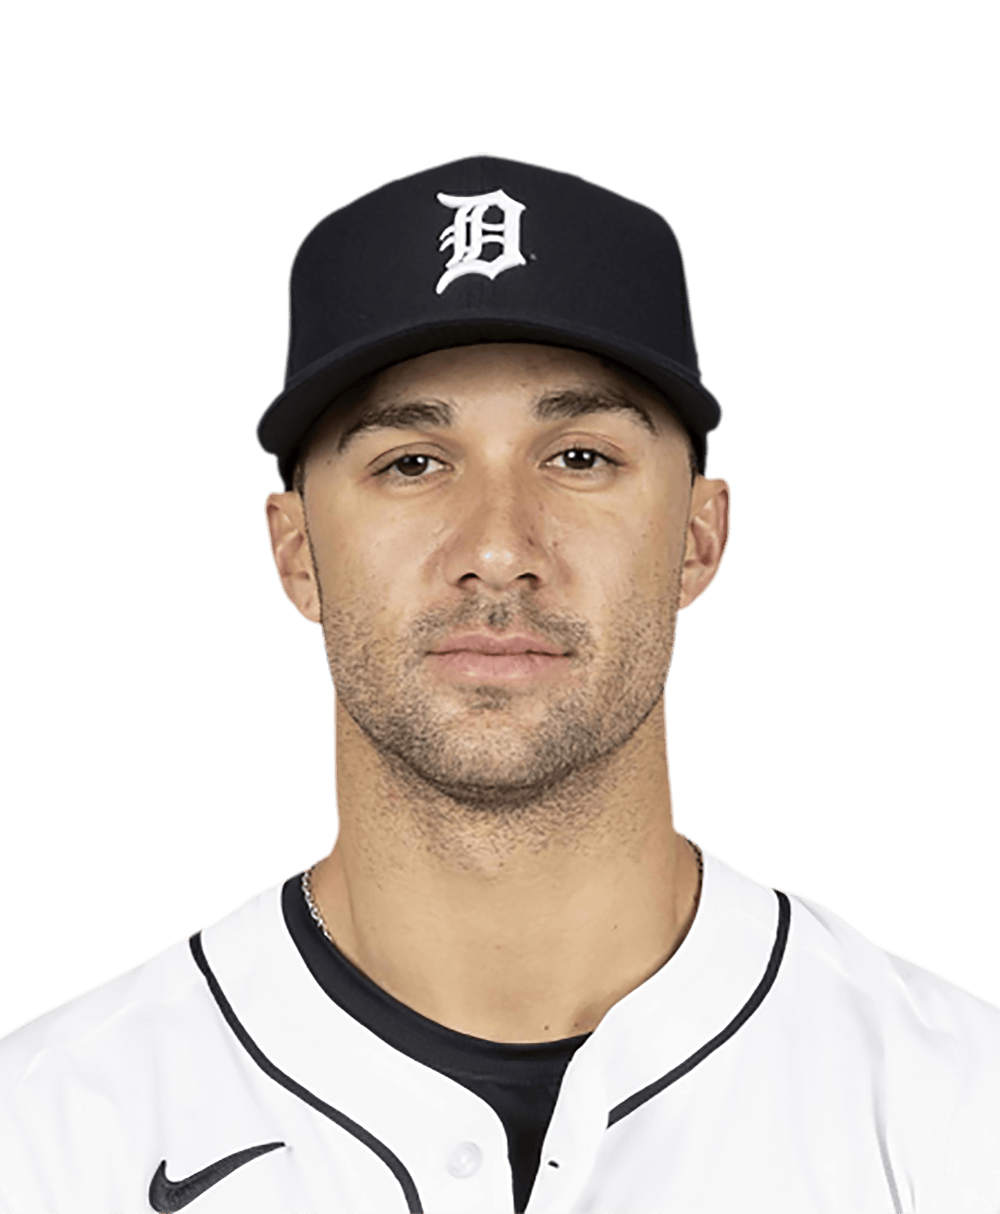 Orioles acquire righty Jack Flaherty from Cardinals